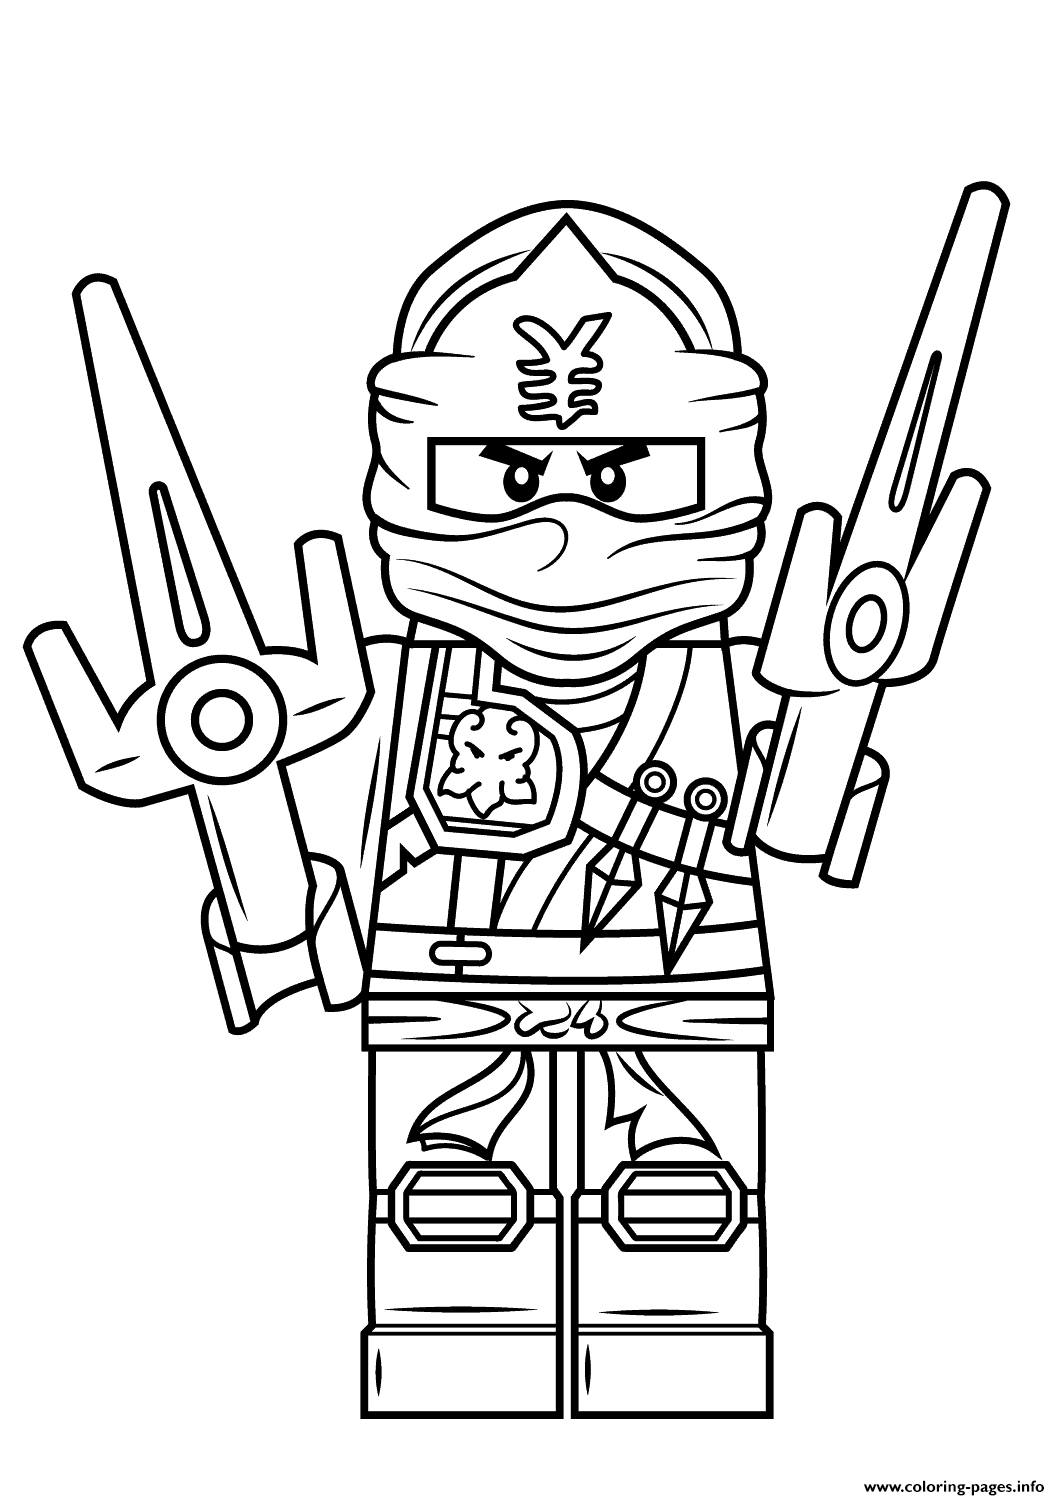 Cartoon Network Coloring Pages To Print Coloring Pages Remarkable Lego Ninjago Coloring Book Game For